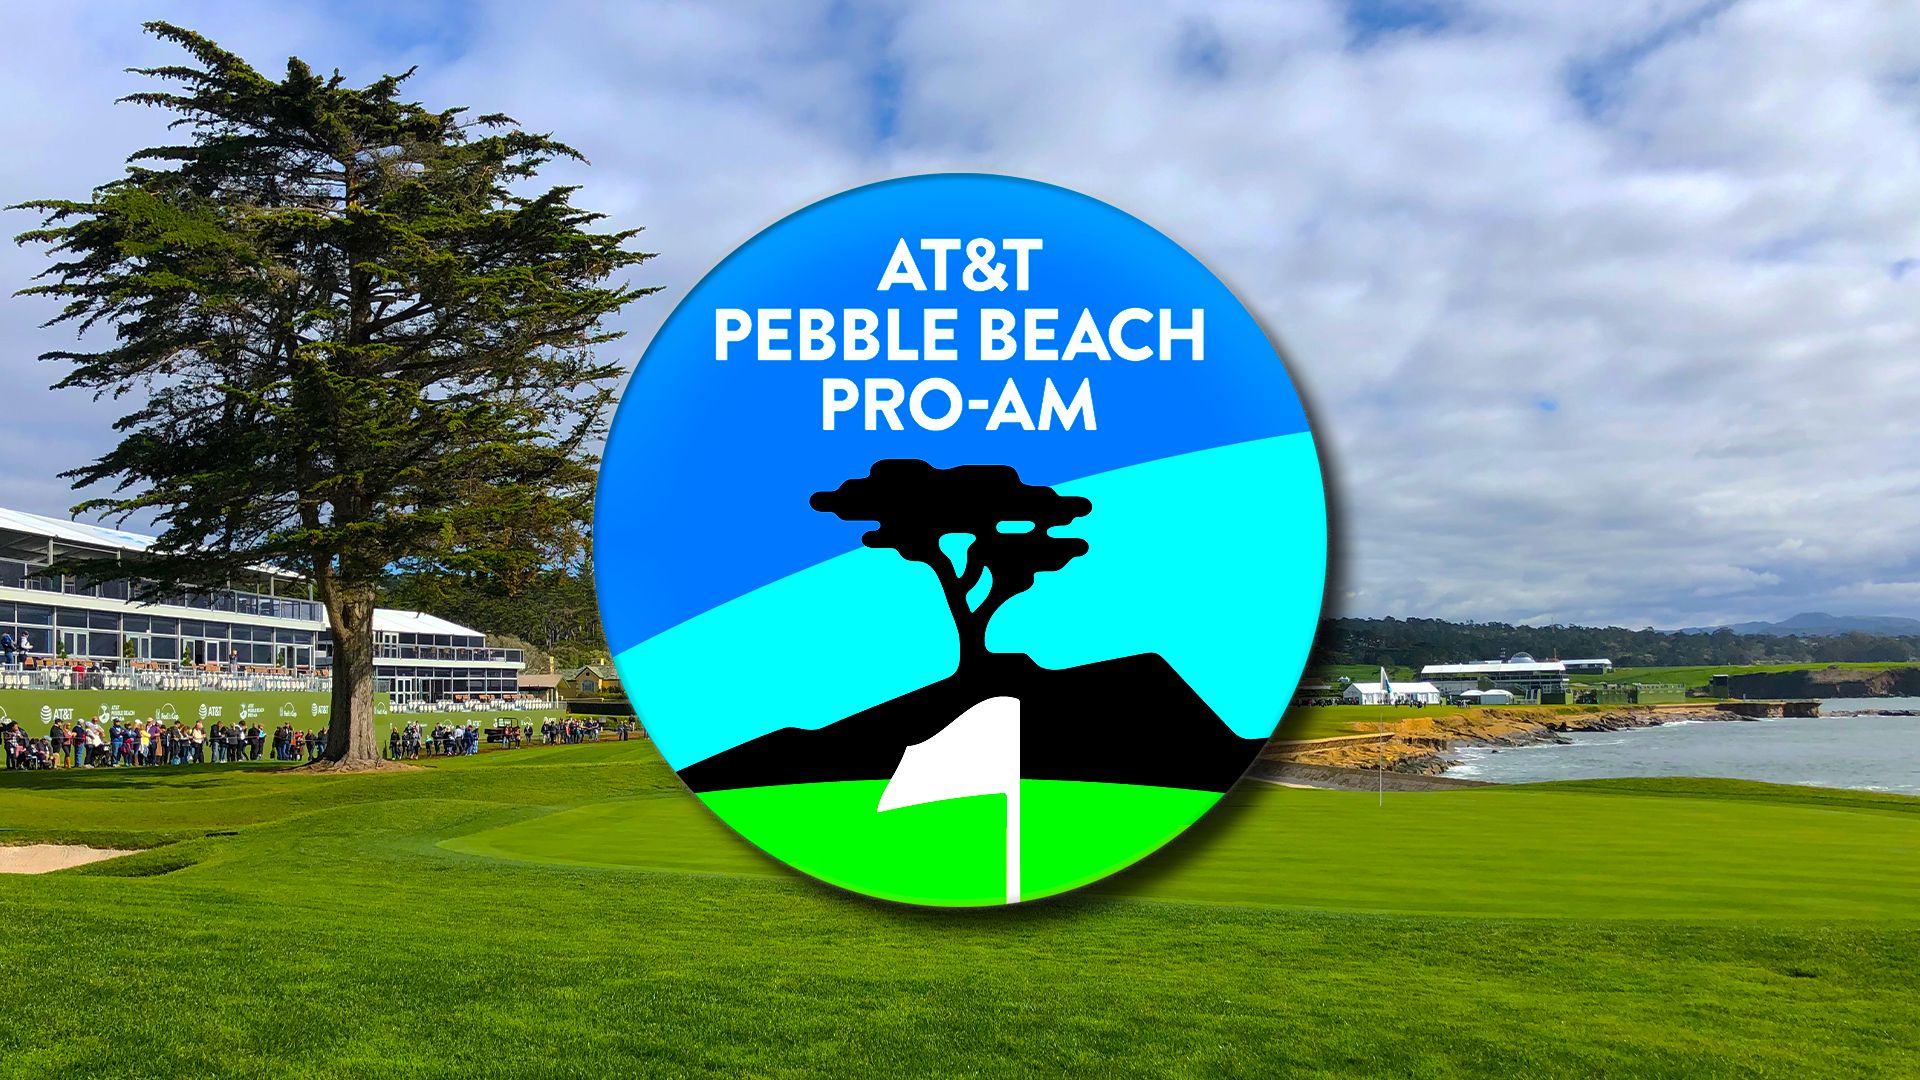 Where to park for the ATandT Pebble Beach Pro-Am